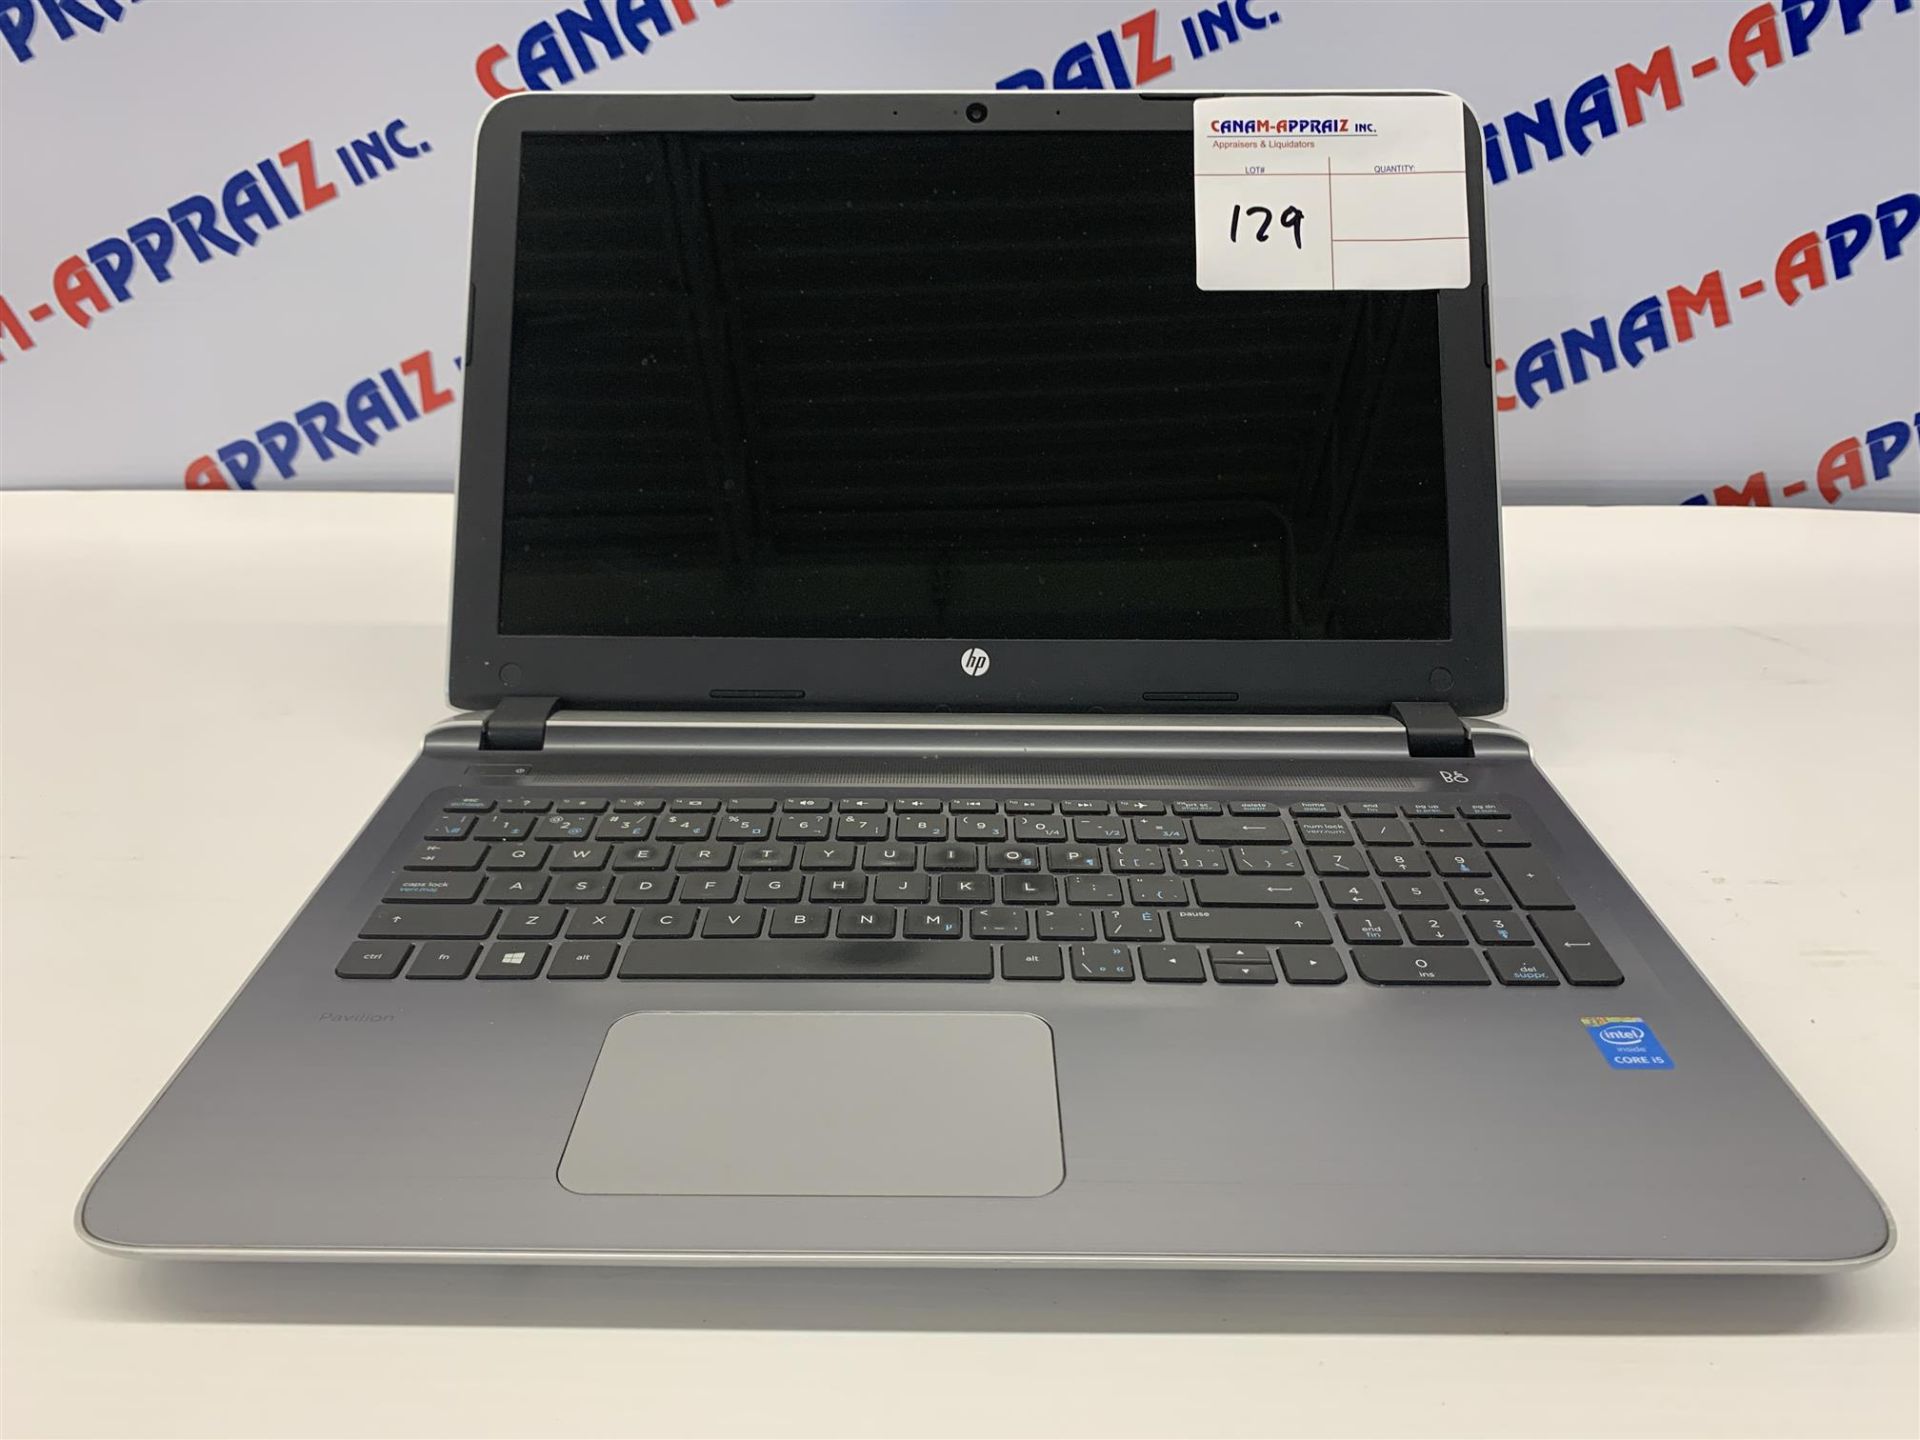 HP - LAPTOP W/CORE I5 PROCESSOR - HHD: UNKNOWN; MEMORY: UNKNOWN (DAMAGED OPTICAL DRIVE)